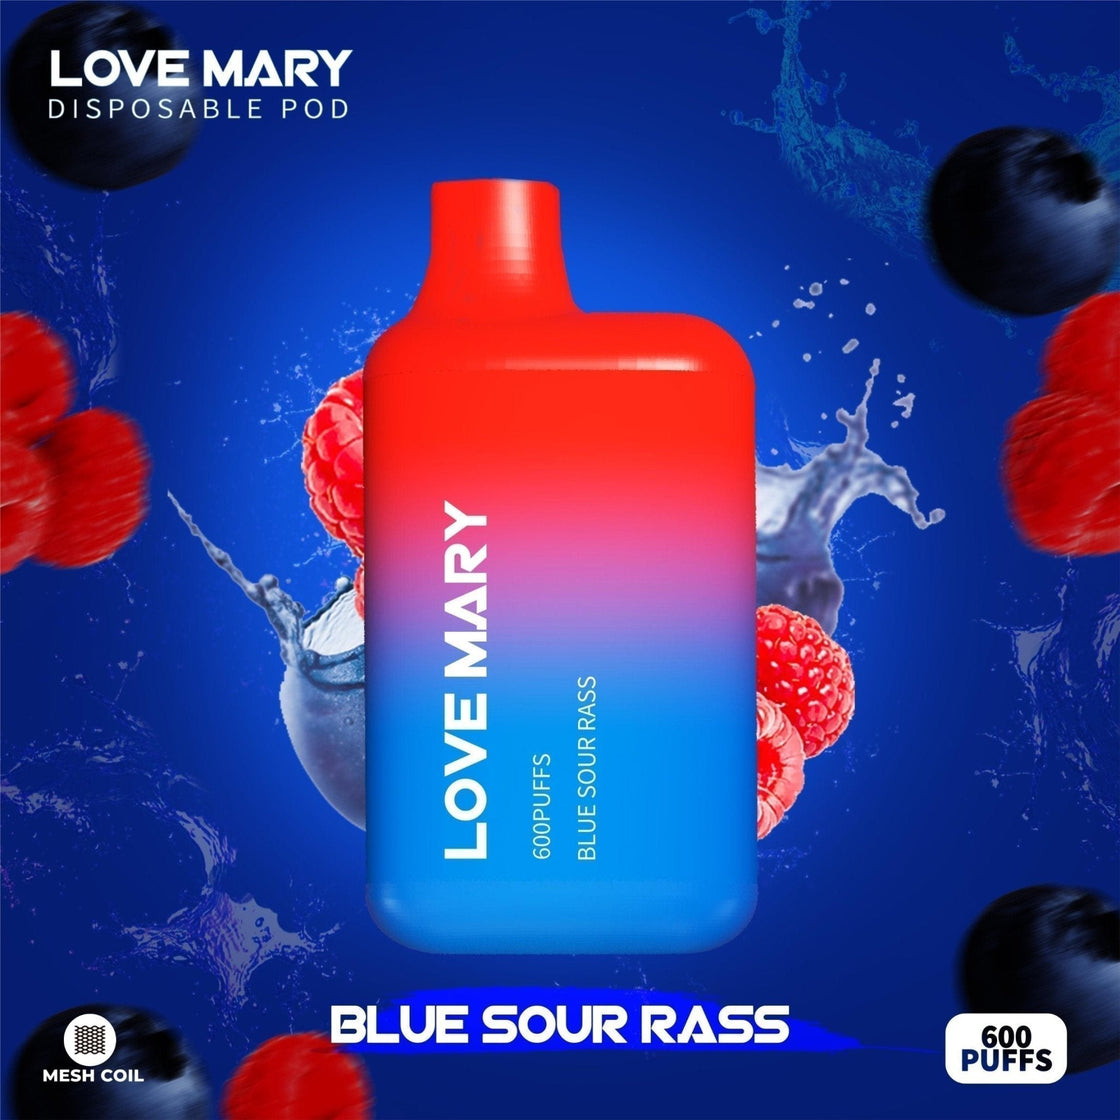 Love Mary 600 puffs Disposable Vape Pack of 10